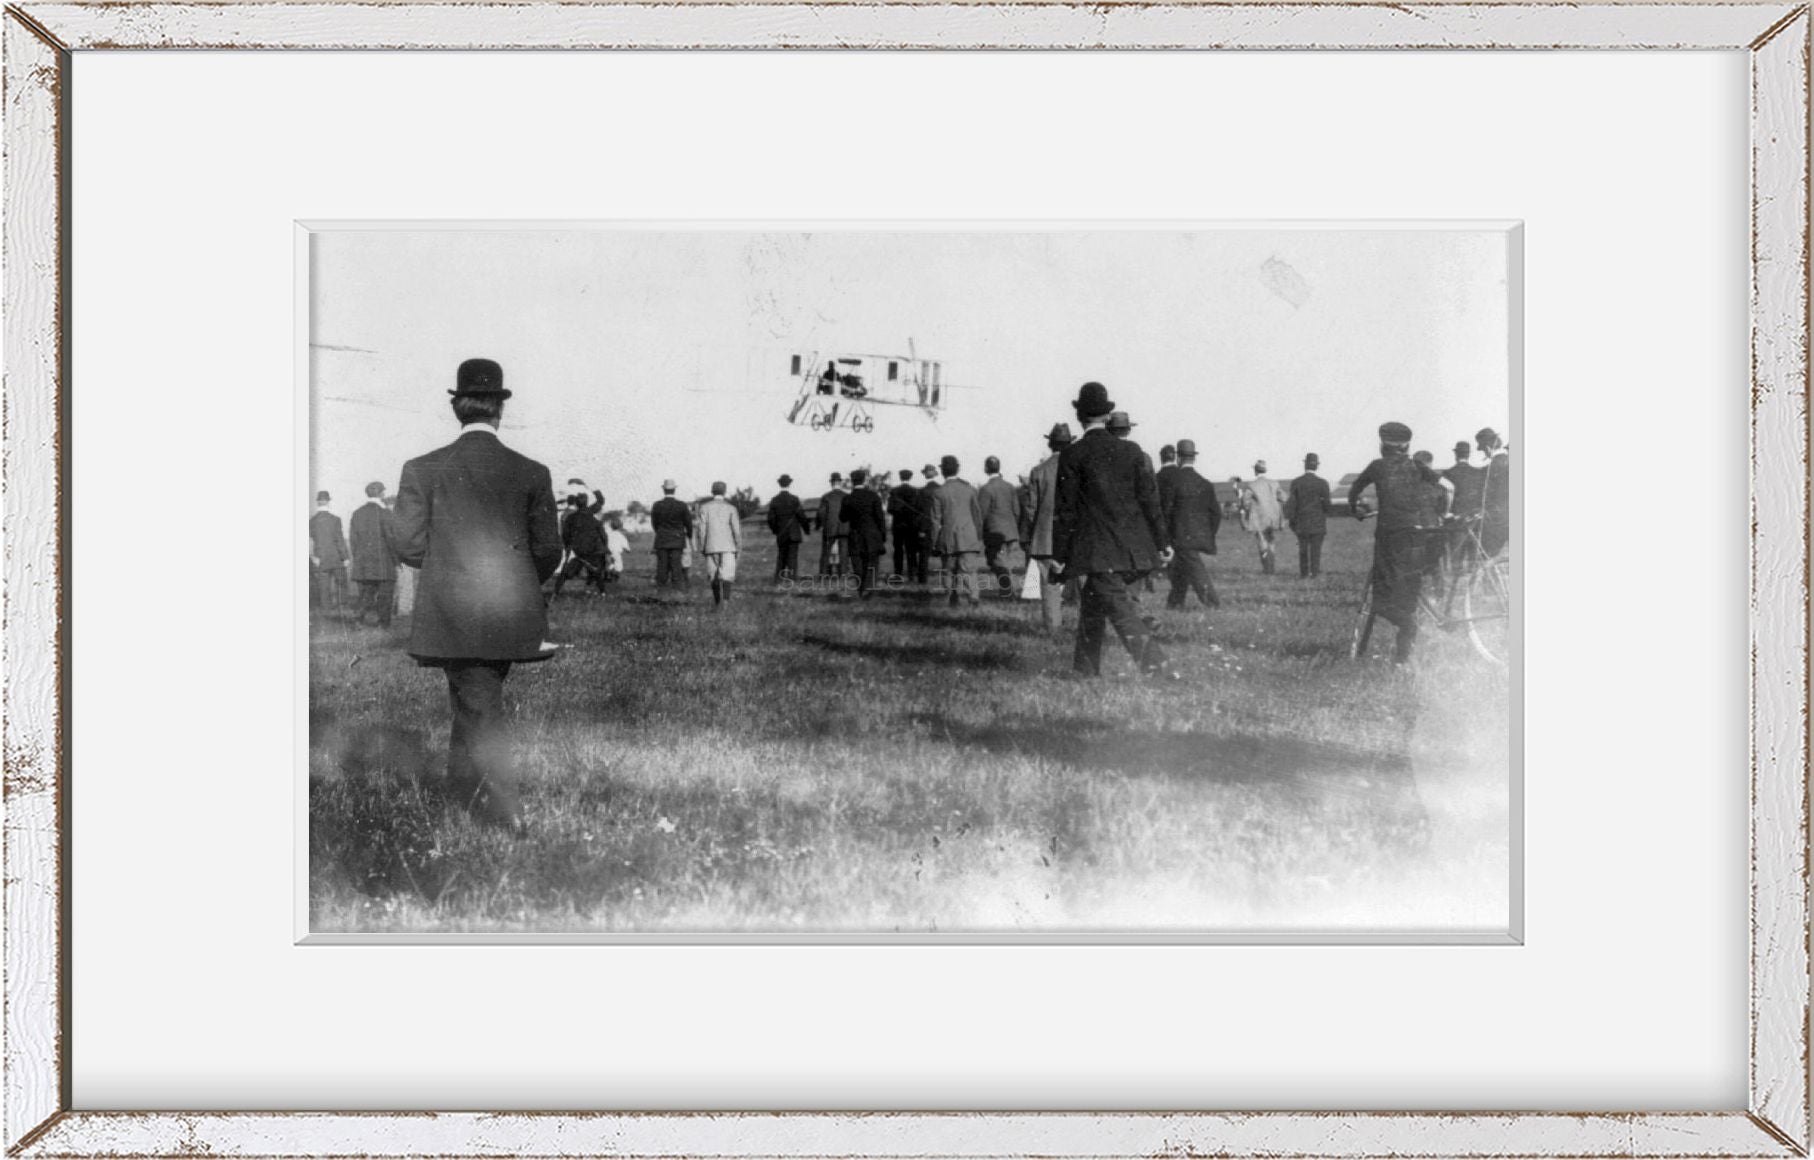 1911 Photo Calbreath [i.e. Calbraith] Rodgers Aloft in plane; large crowd in for